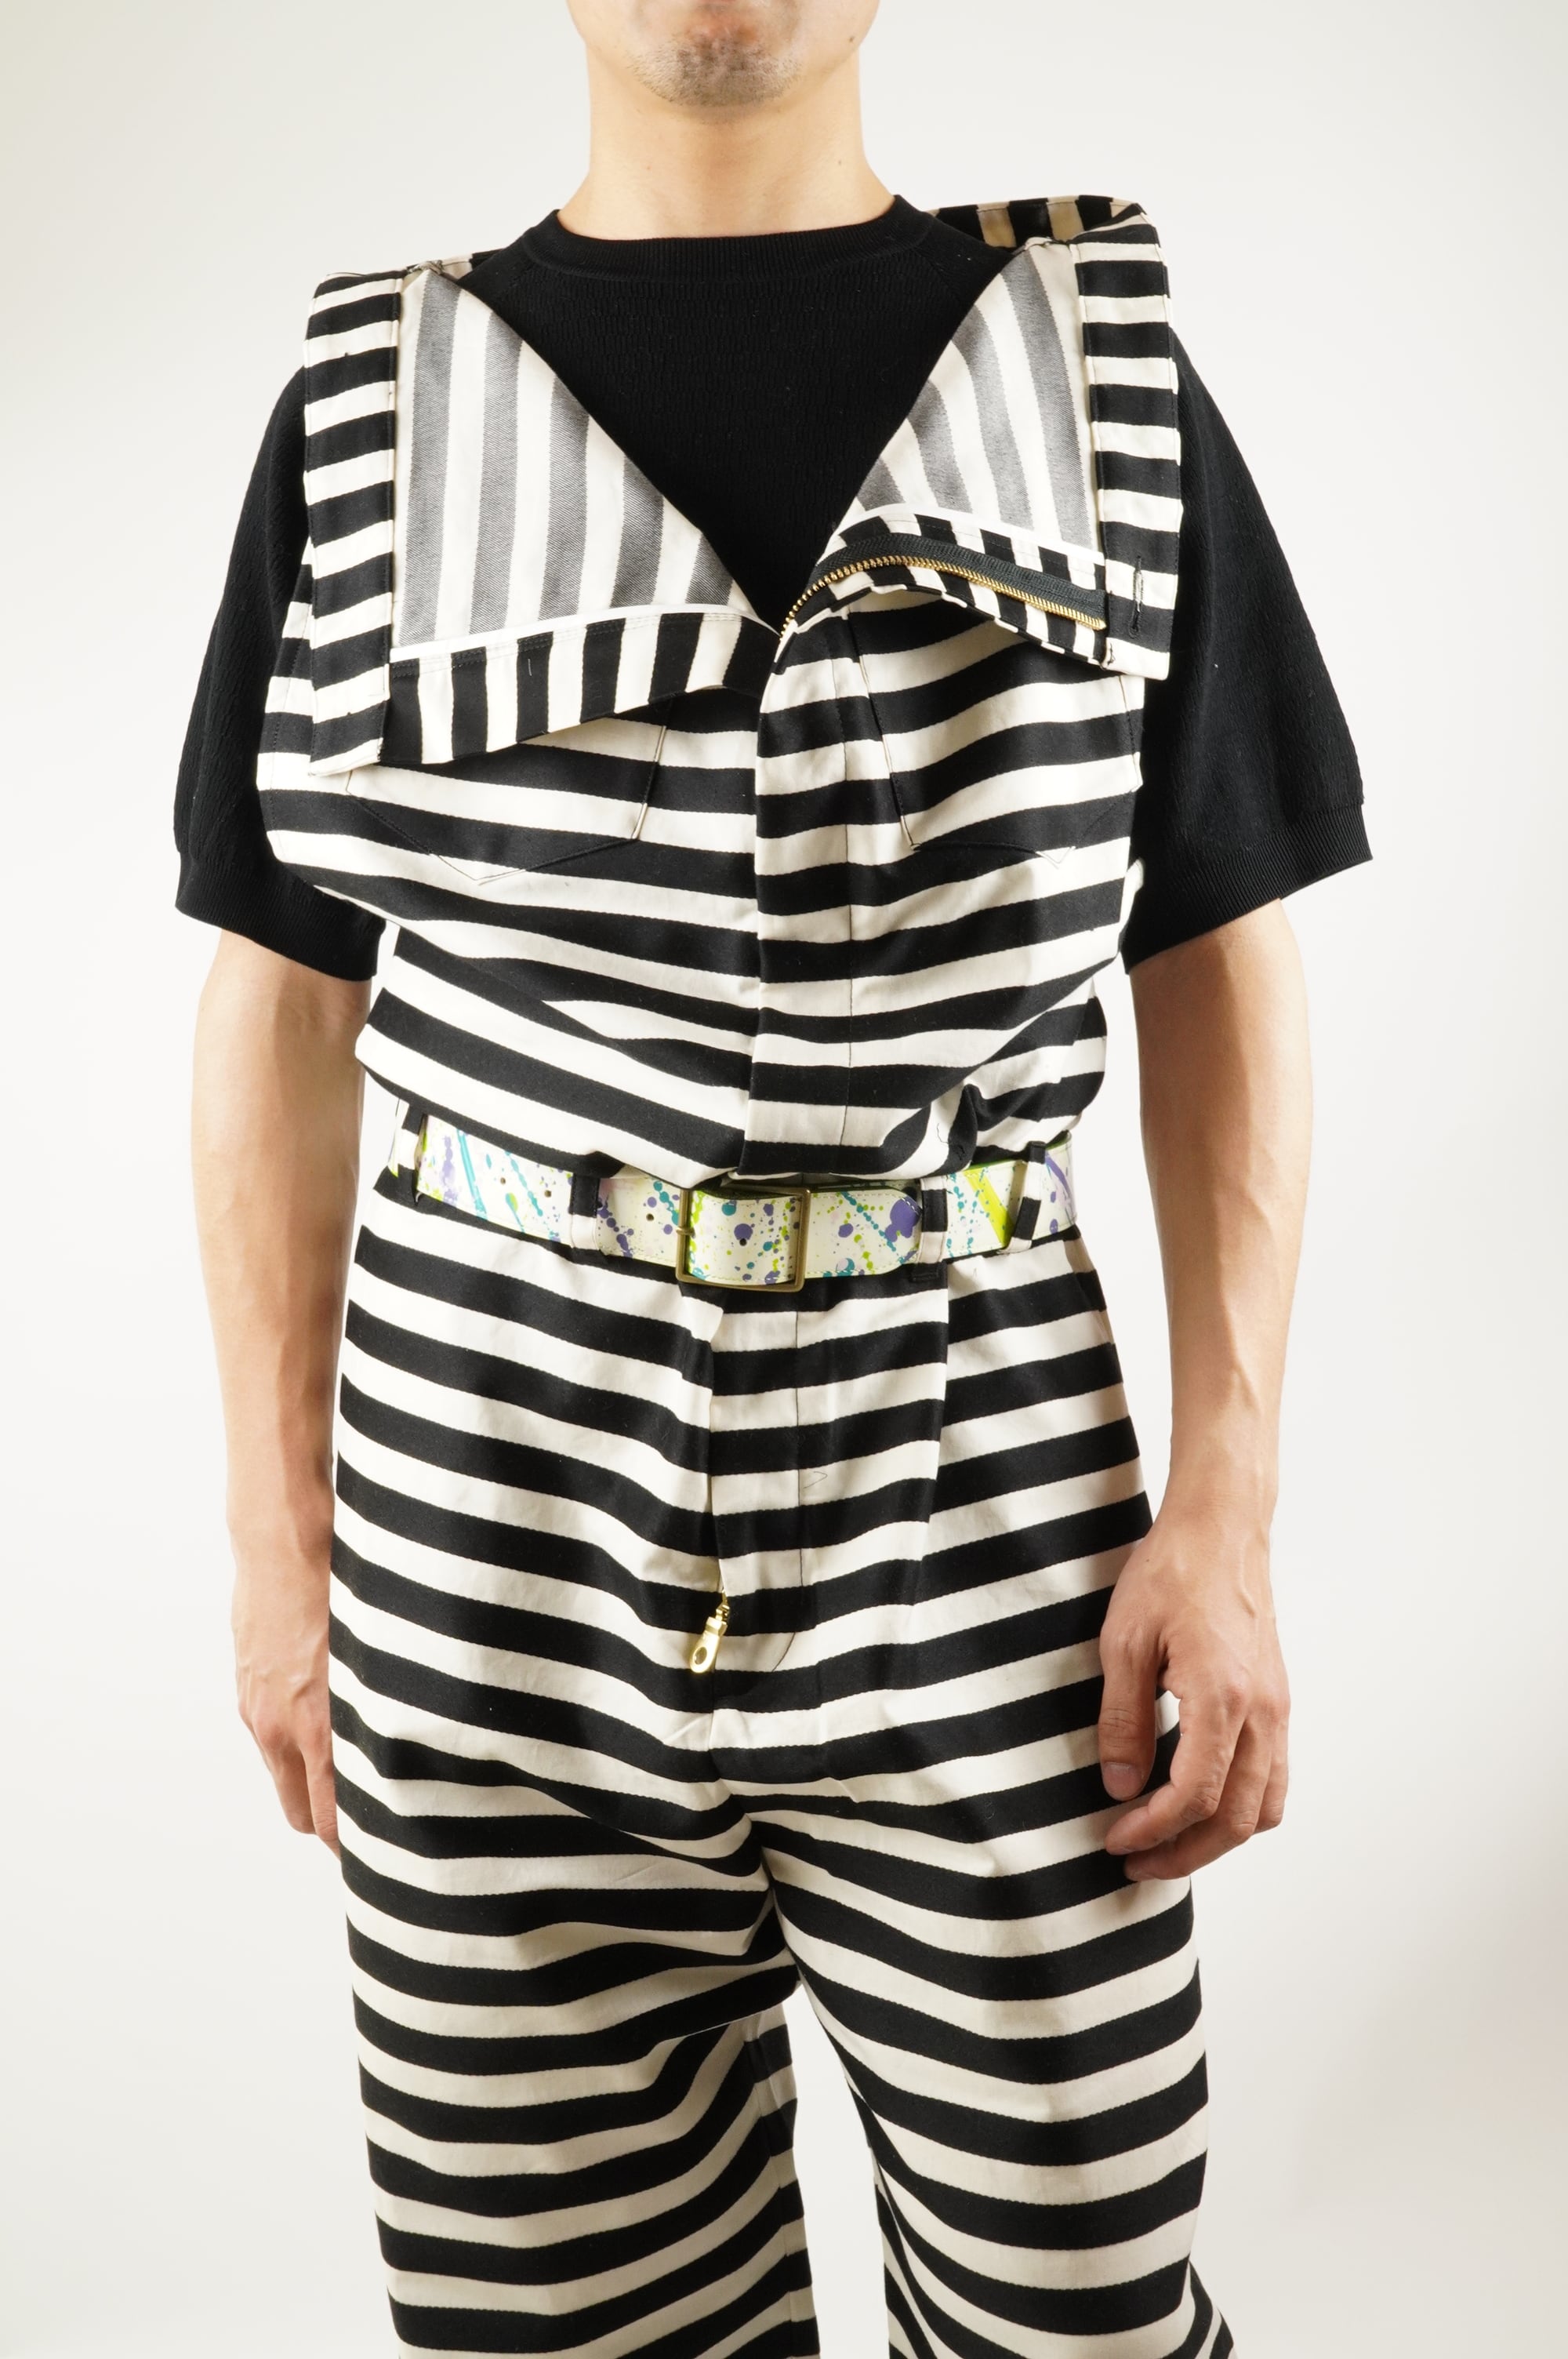 RANDY/''Lost property'' Trousers jump suit | ARCD powered by BASE